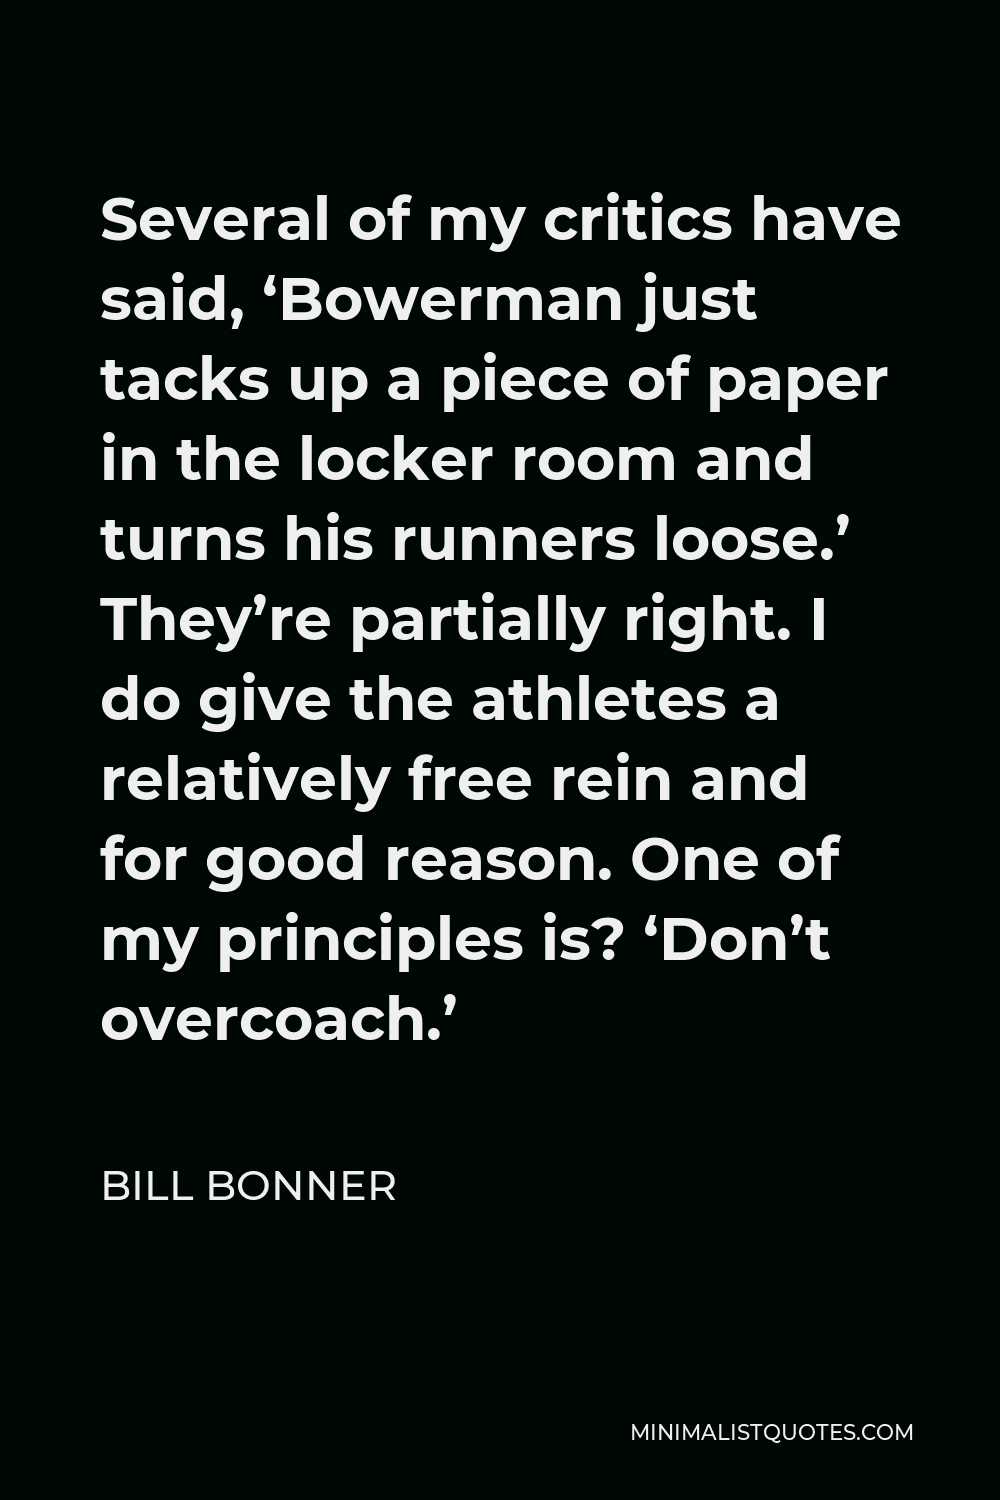 Bill Bonner Quote - Several of my critics have said, ‘Bowerman just tacks up a piece of paper in the locker room and turns his runners loose.’ They’re partially right. I do give the athletes a relatively free rein and for good reason. One of my principles is? ‘Don’t overcoach.’